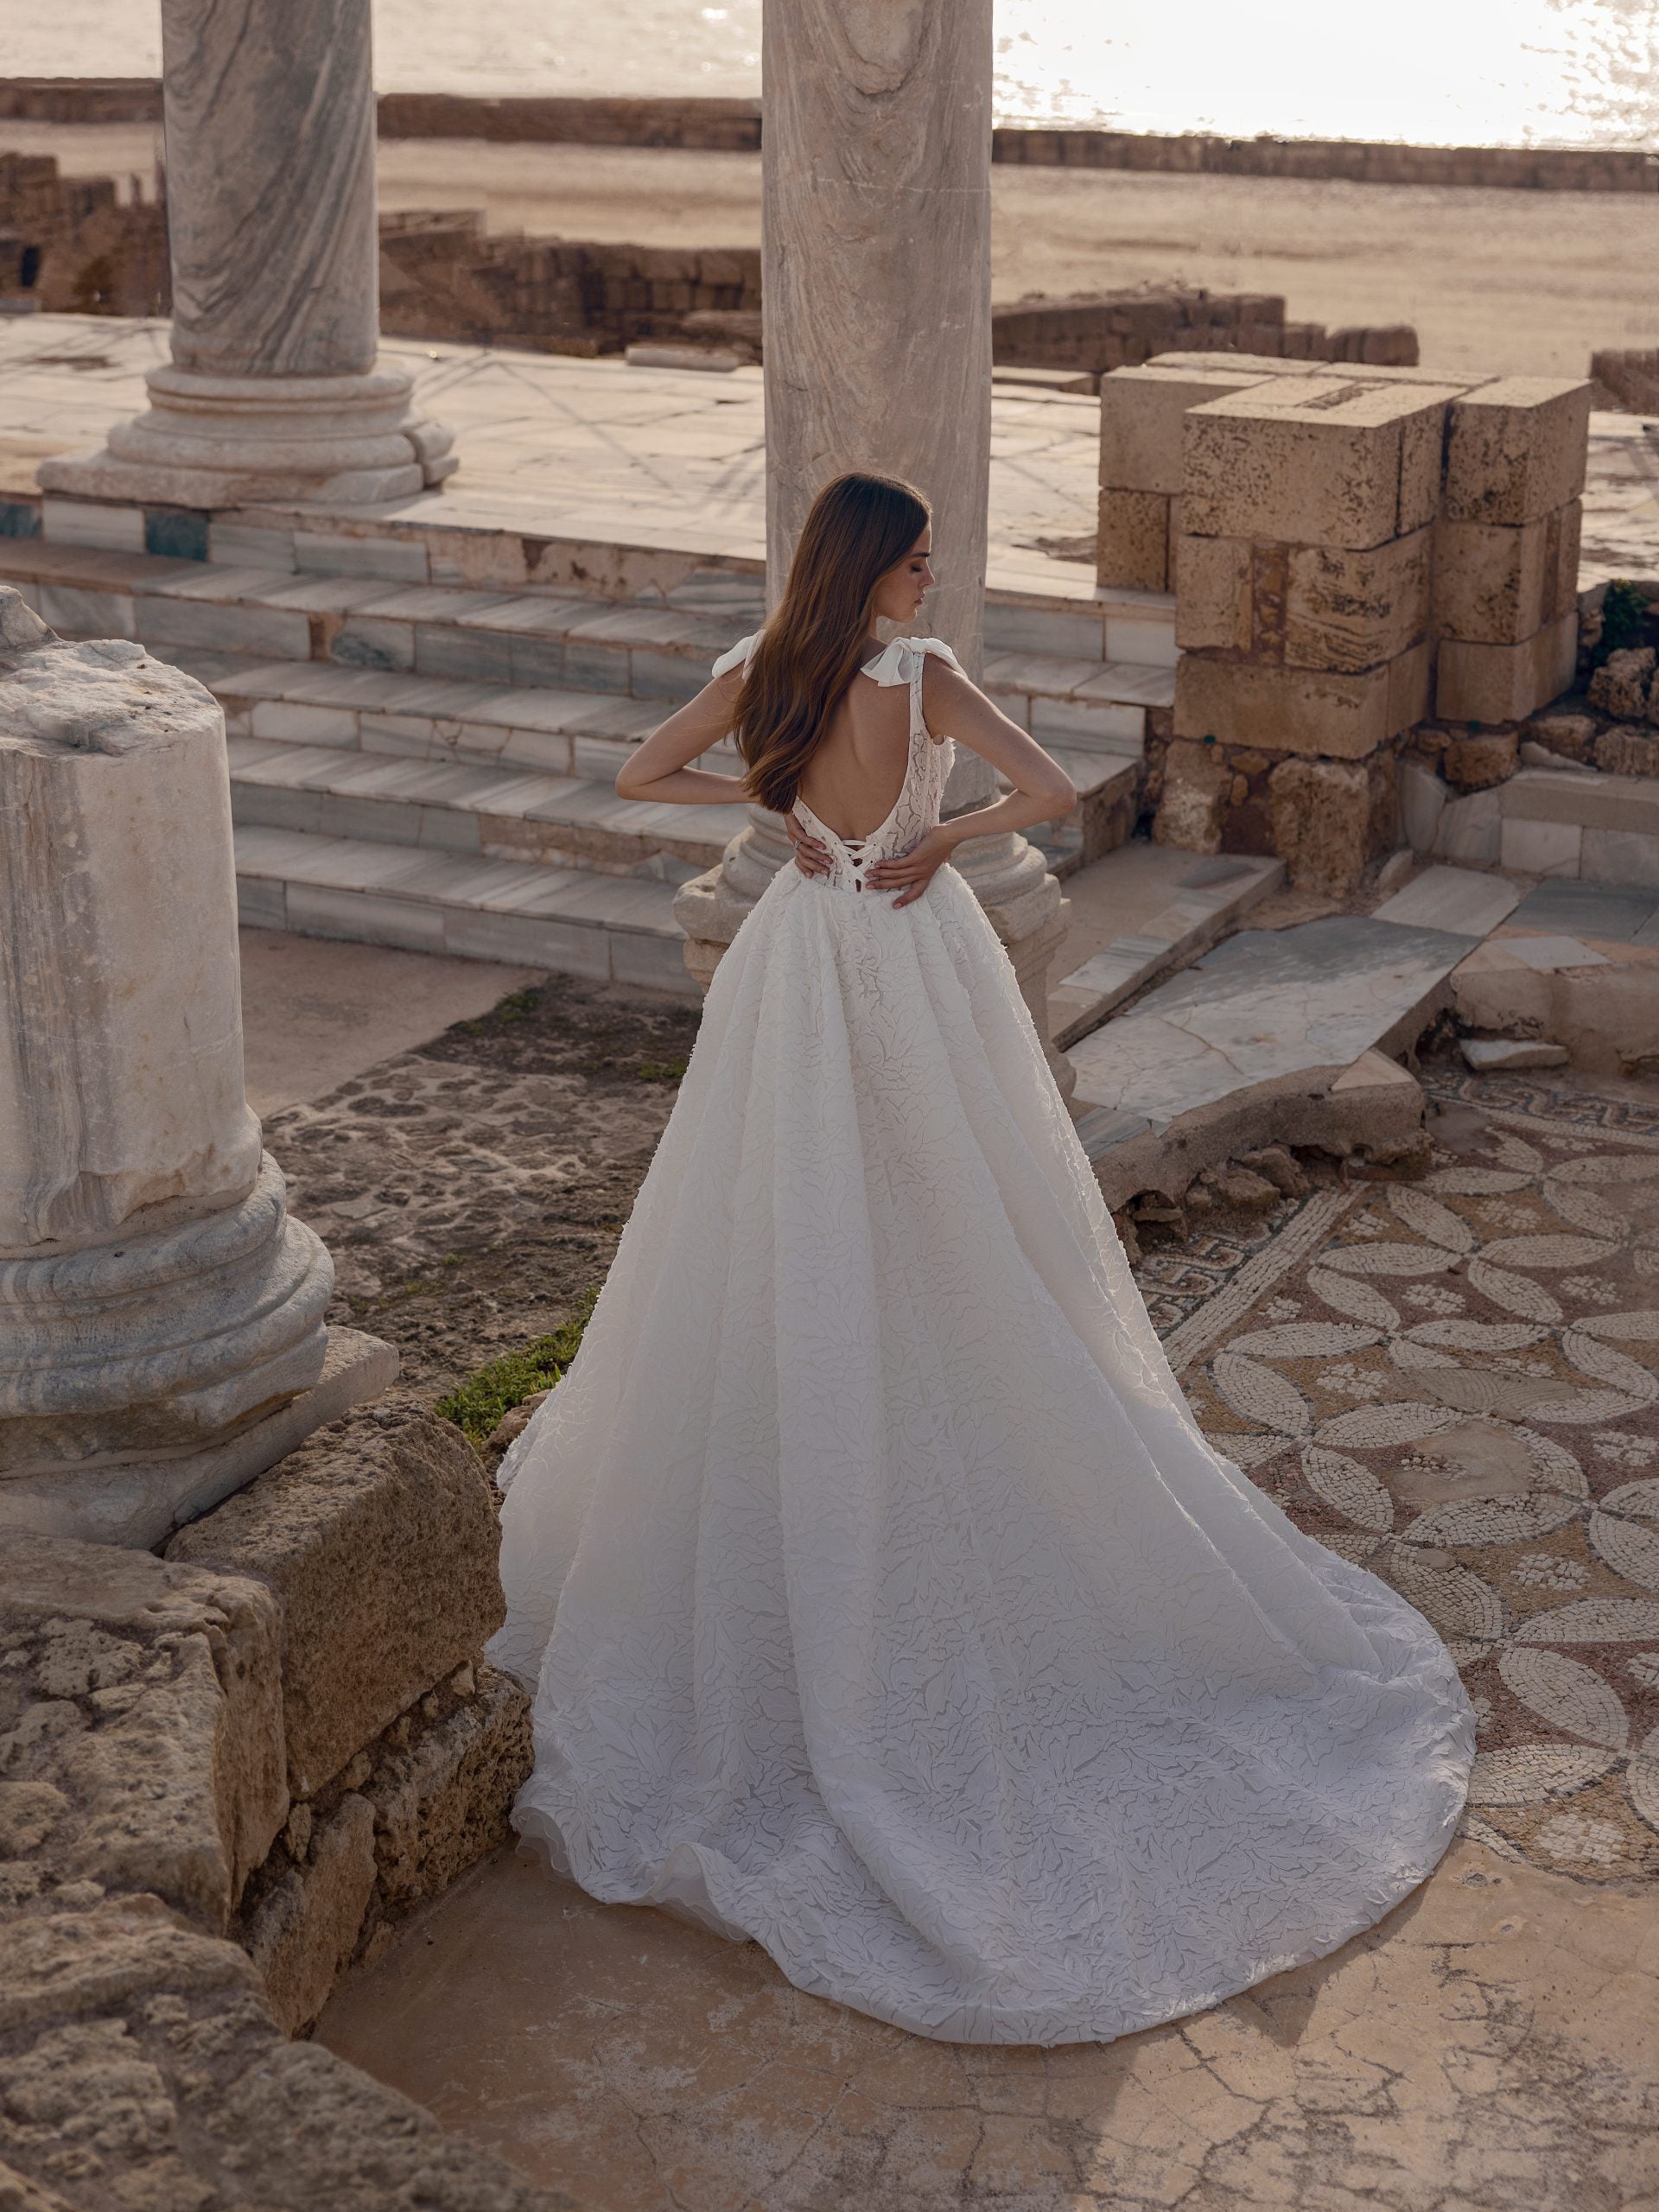 Sleeveless Ball Gown Wedding Dress With Corset Back by Love by Pnina Tornai - Image 2